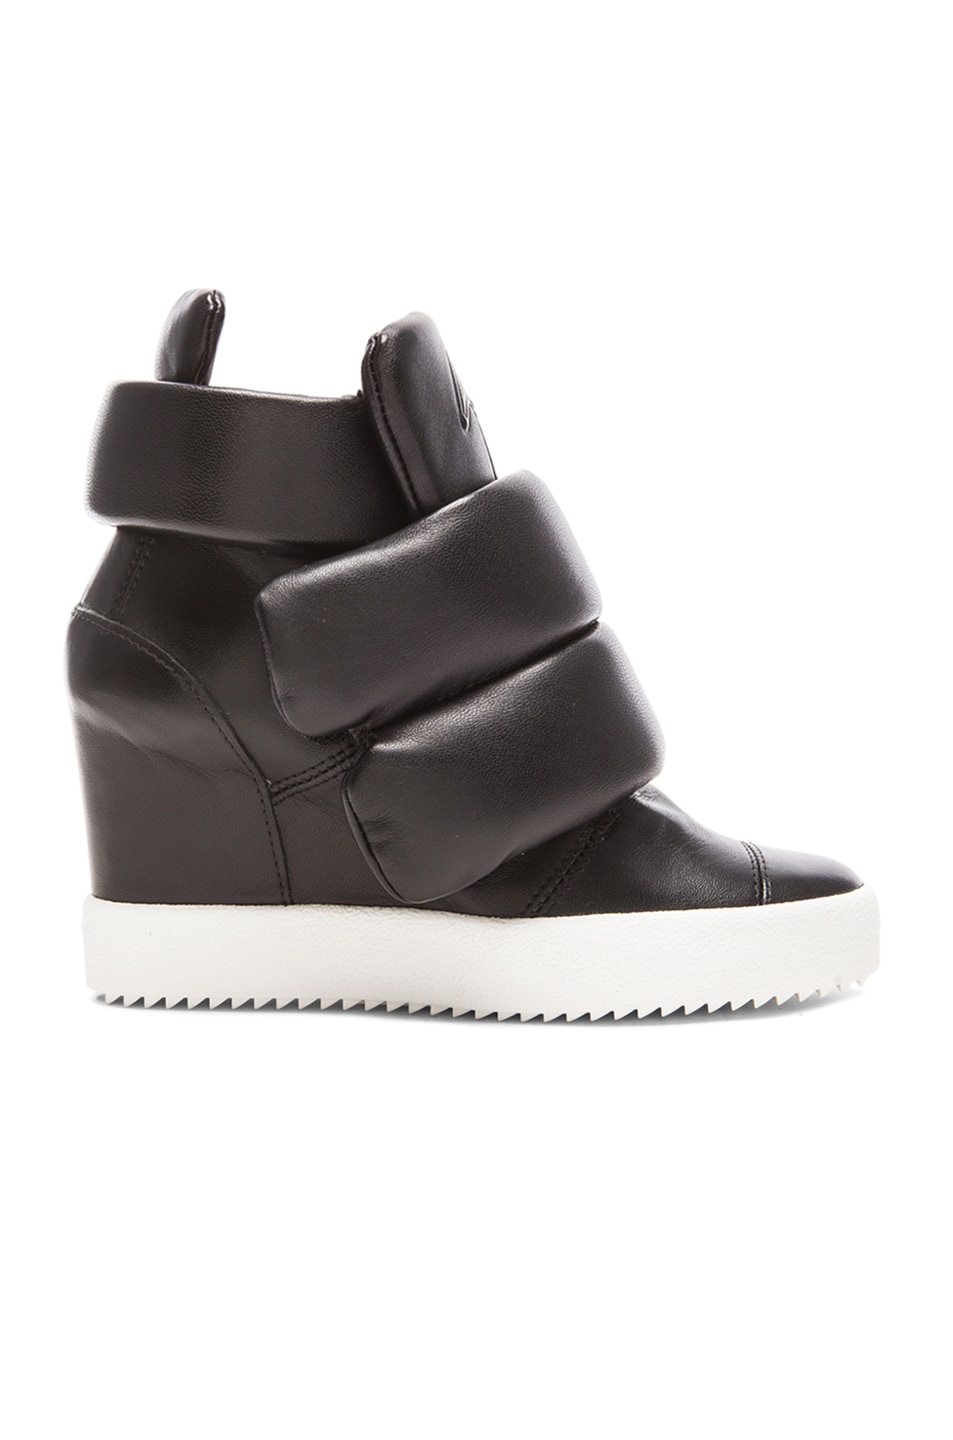 Image 1 of Giuseppe Zanotti x Kid Cudi Double Strap Wedged Leather Sneakers in Black